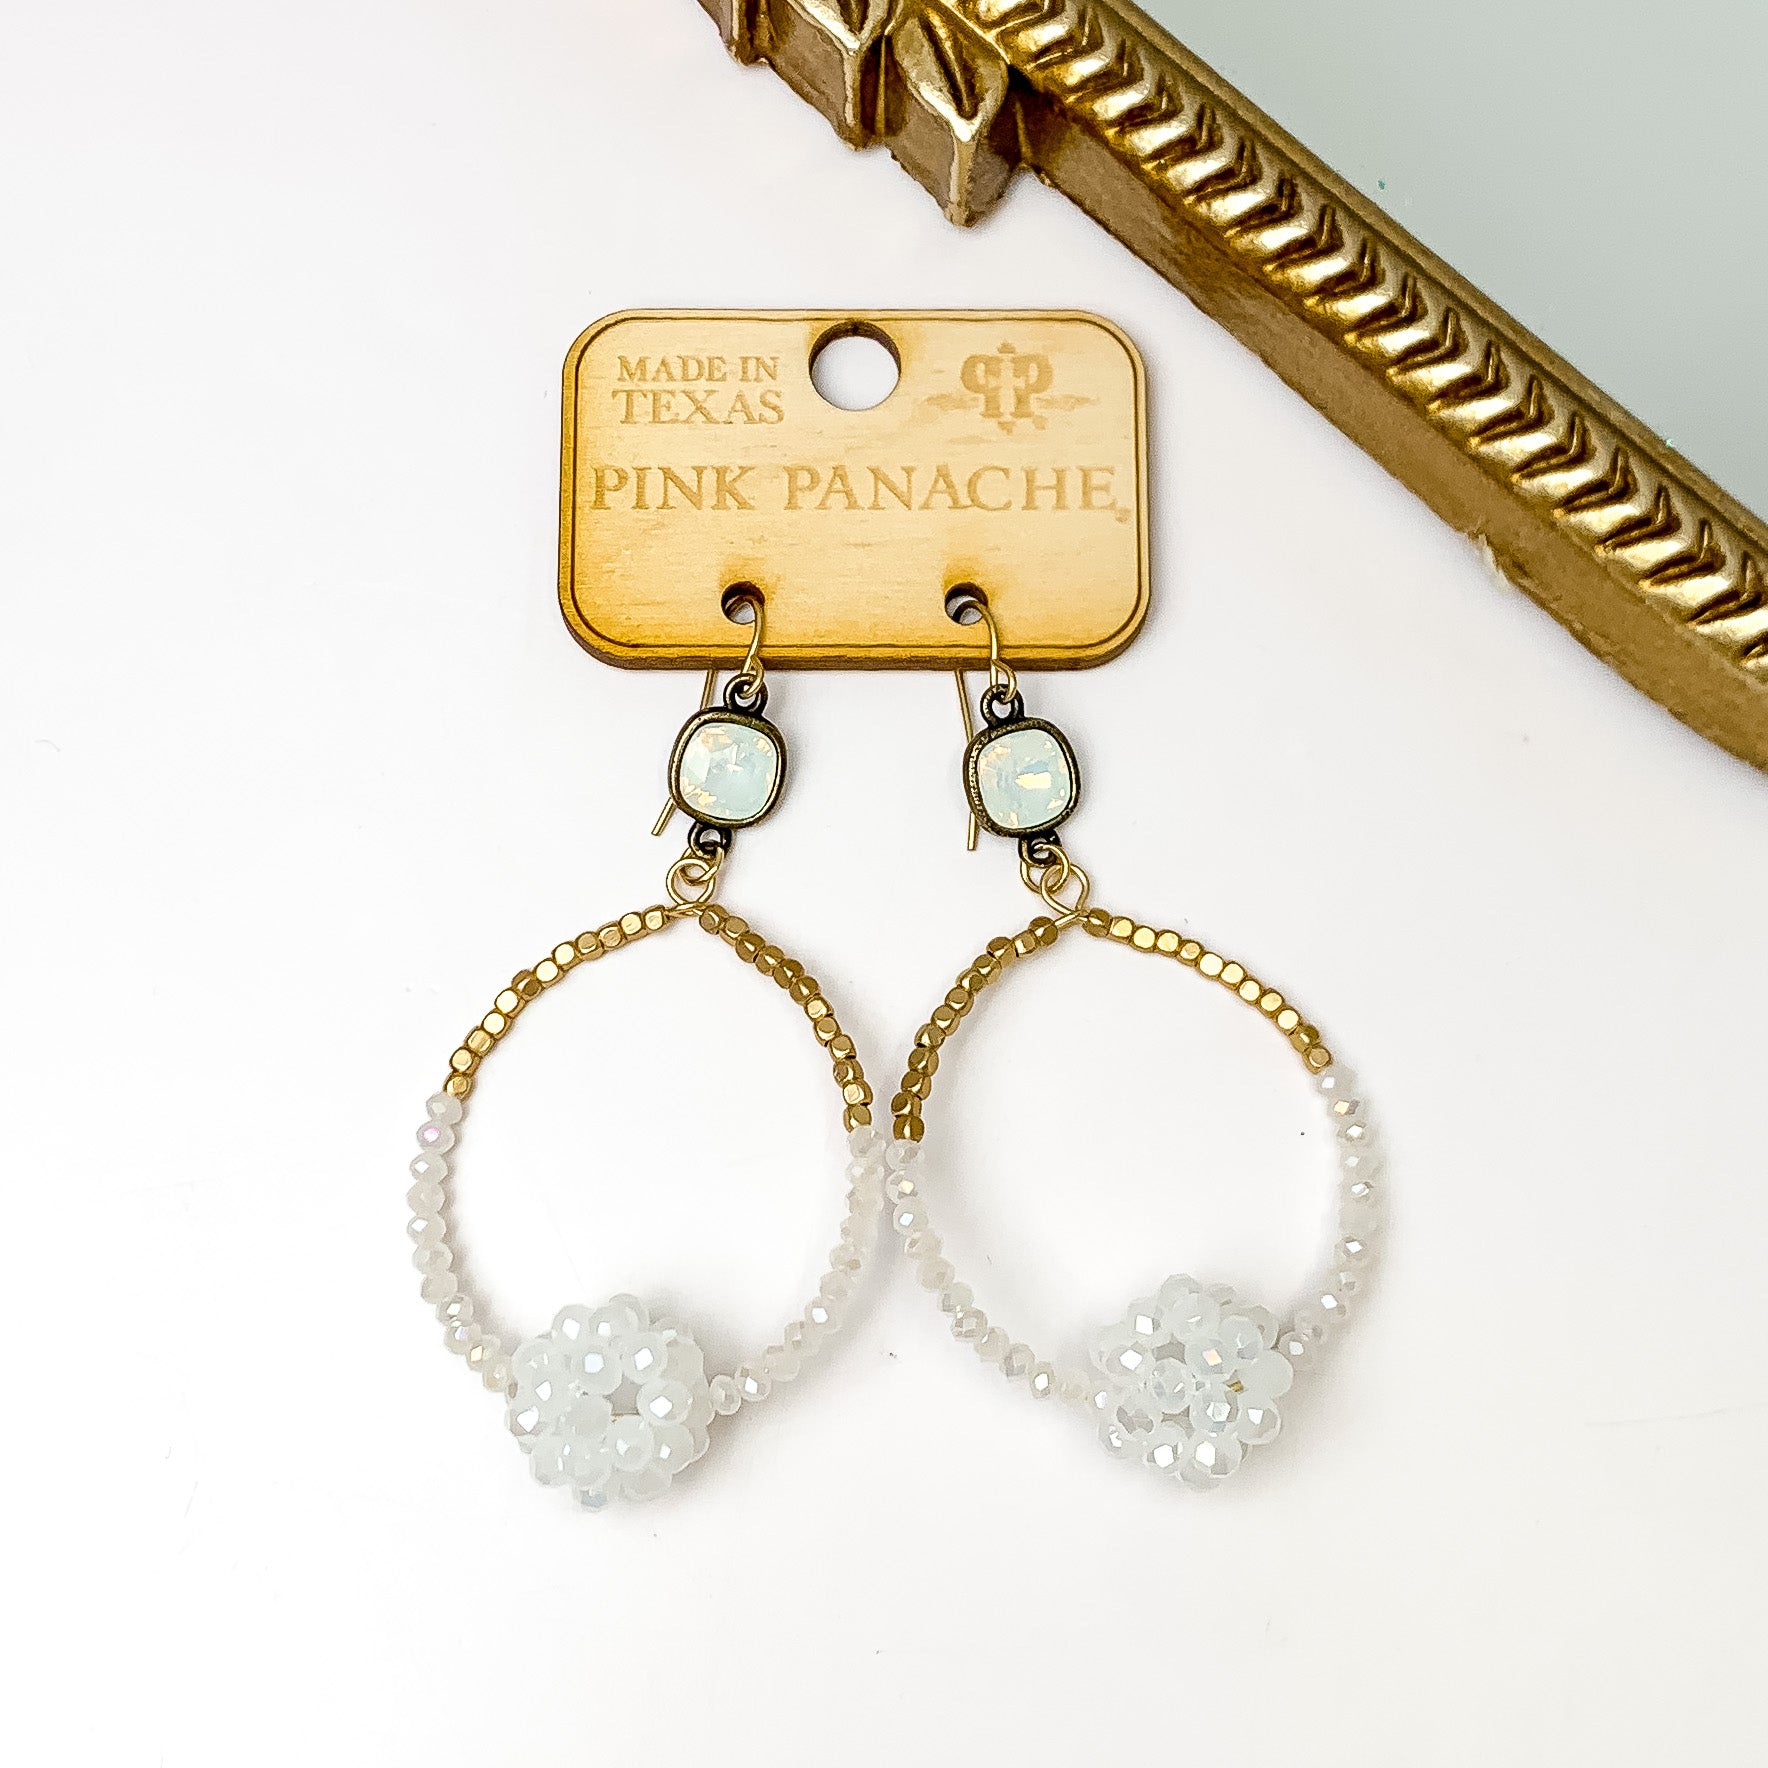 White opal cushion cut on gold fish hook earrings with a gold and white crystal beaded open circle. These earrings are pictured on a wooden earrings holder on a white background with a gold mirror in the top right corner. 